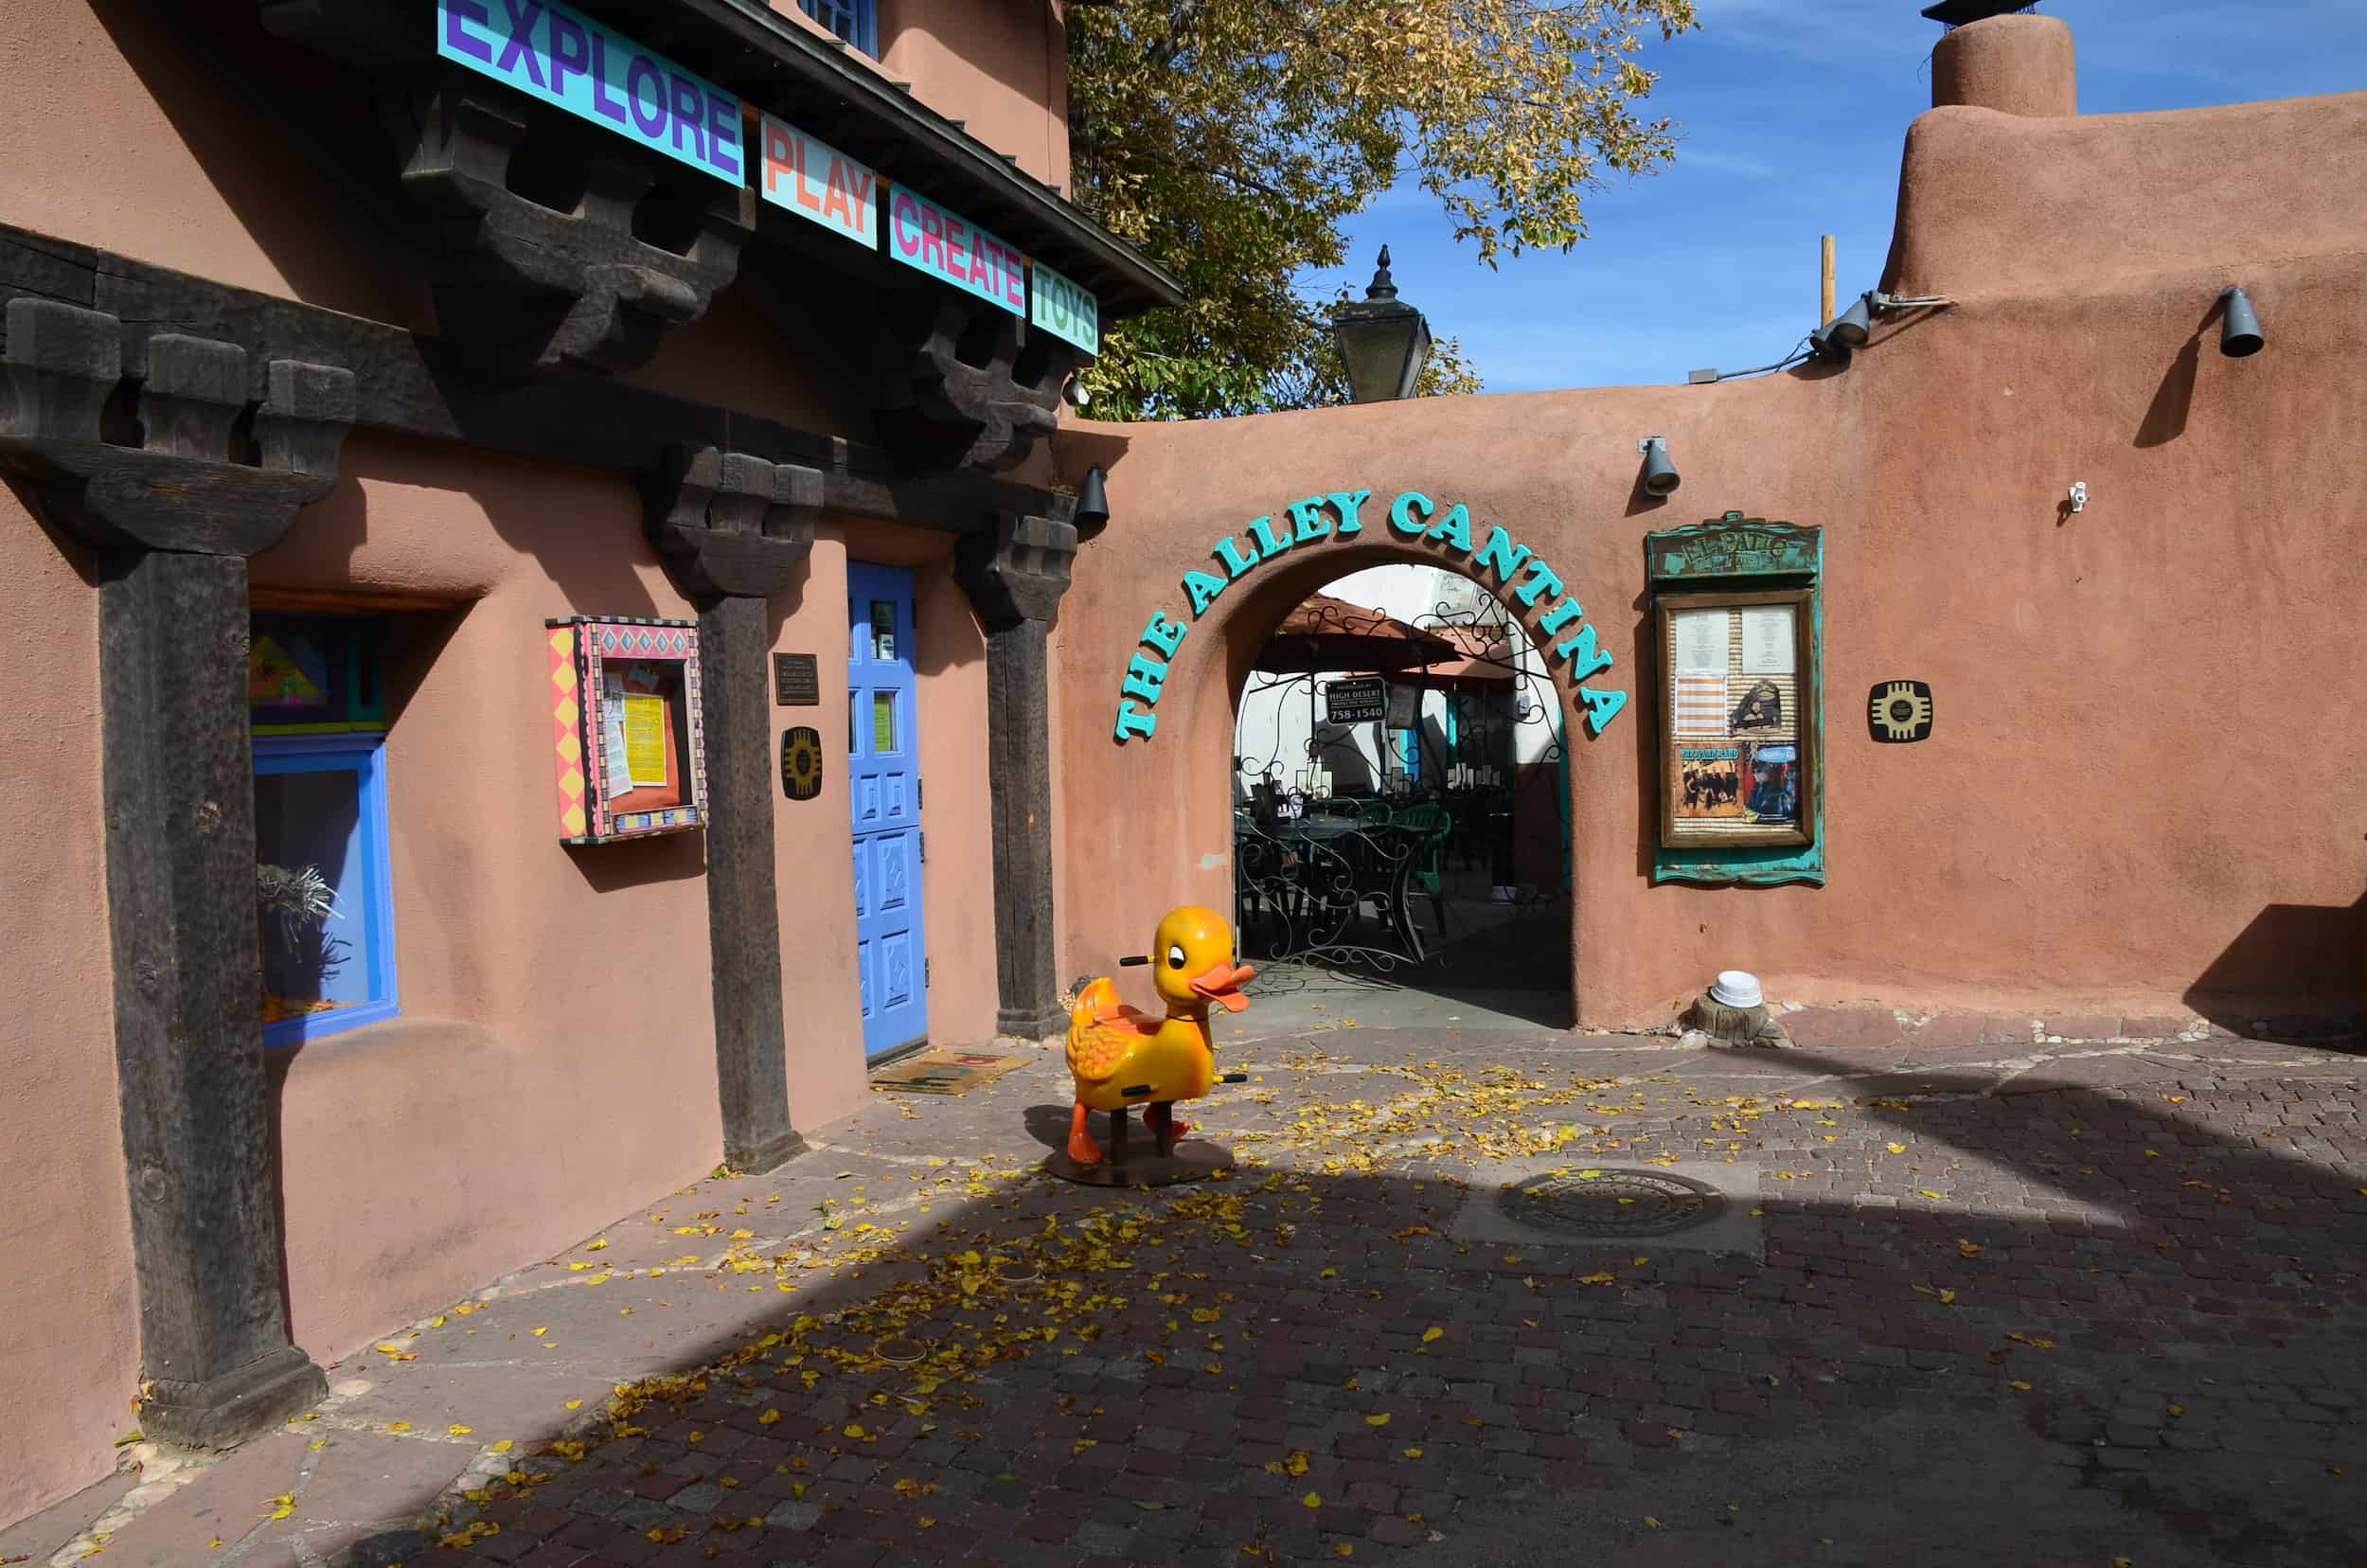 The Alley Cantina in Taos, New Mexico